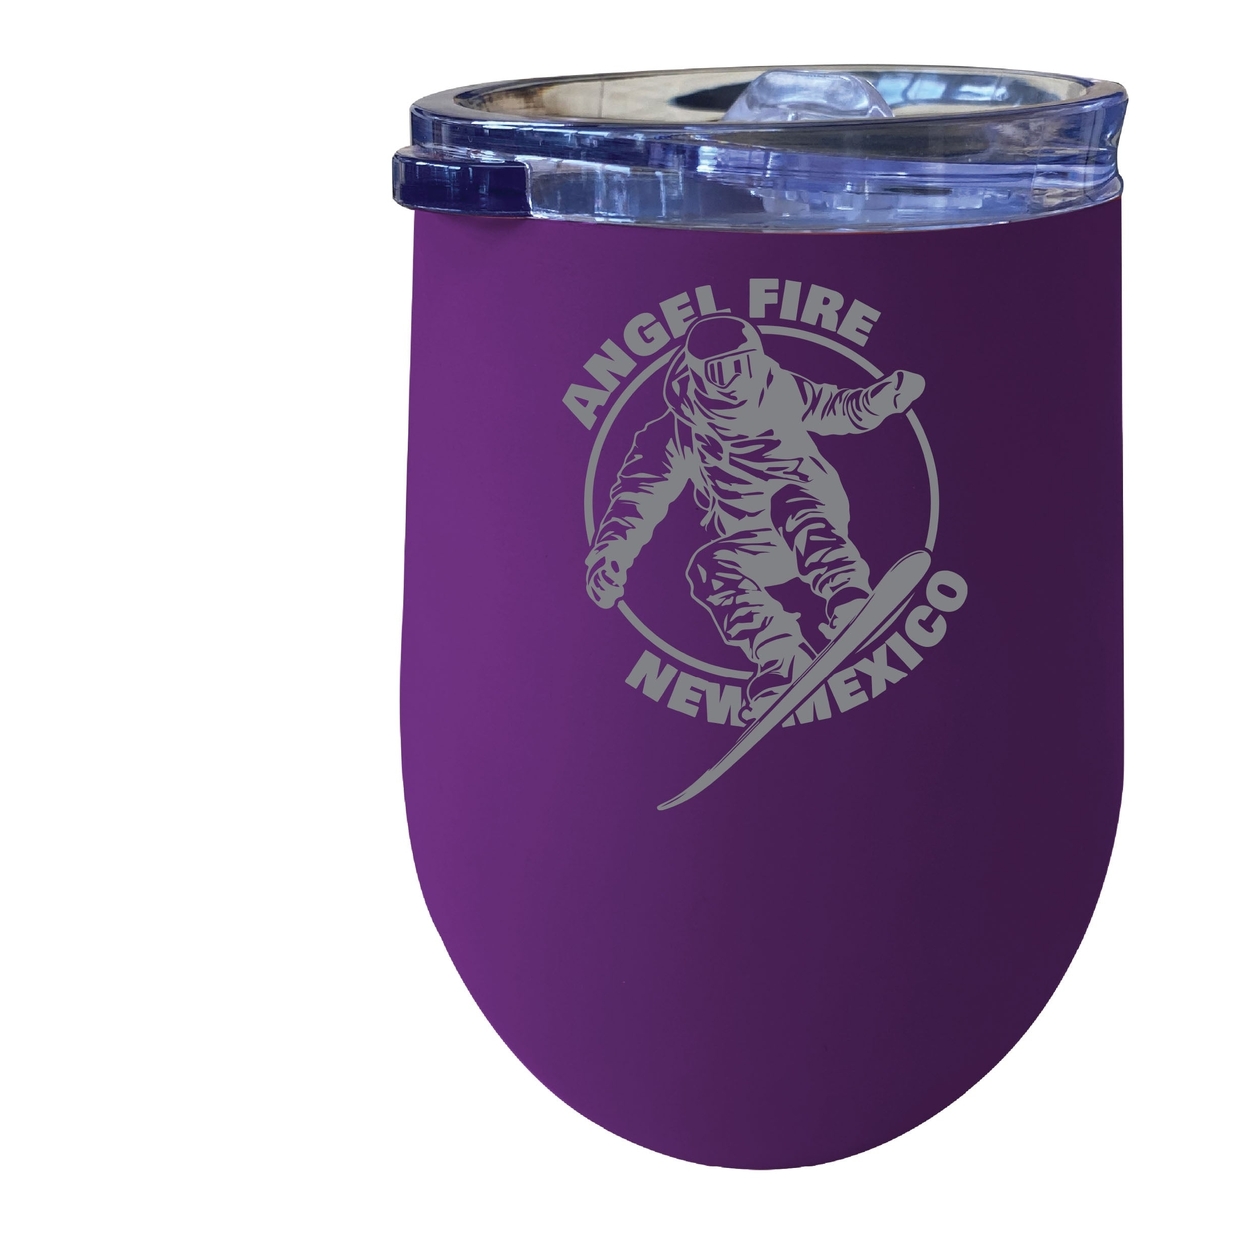 Angel Fire New Mexico Souvenir 12 Oz Engraved Insulated Wine Stainless Steel Tumbler - Purple,,4-Pack